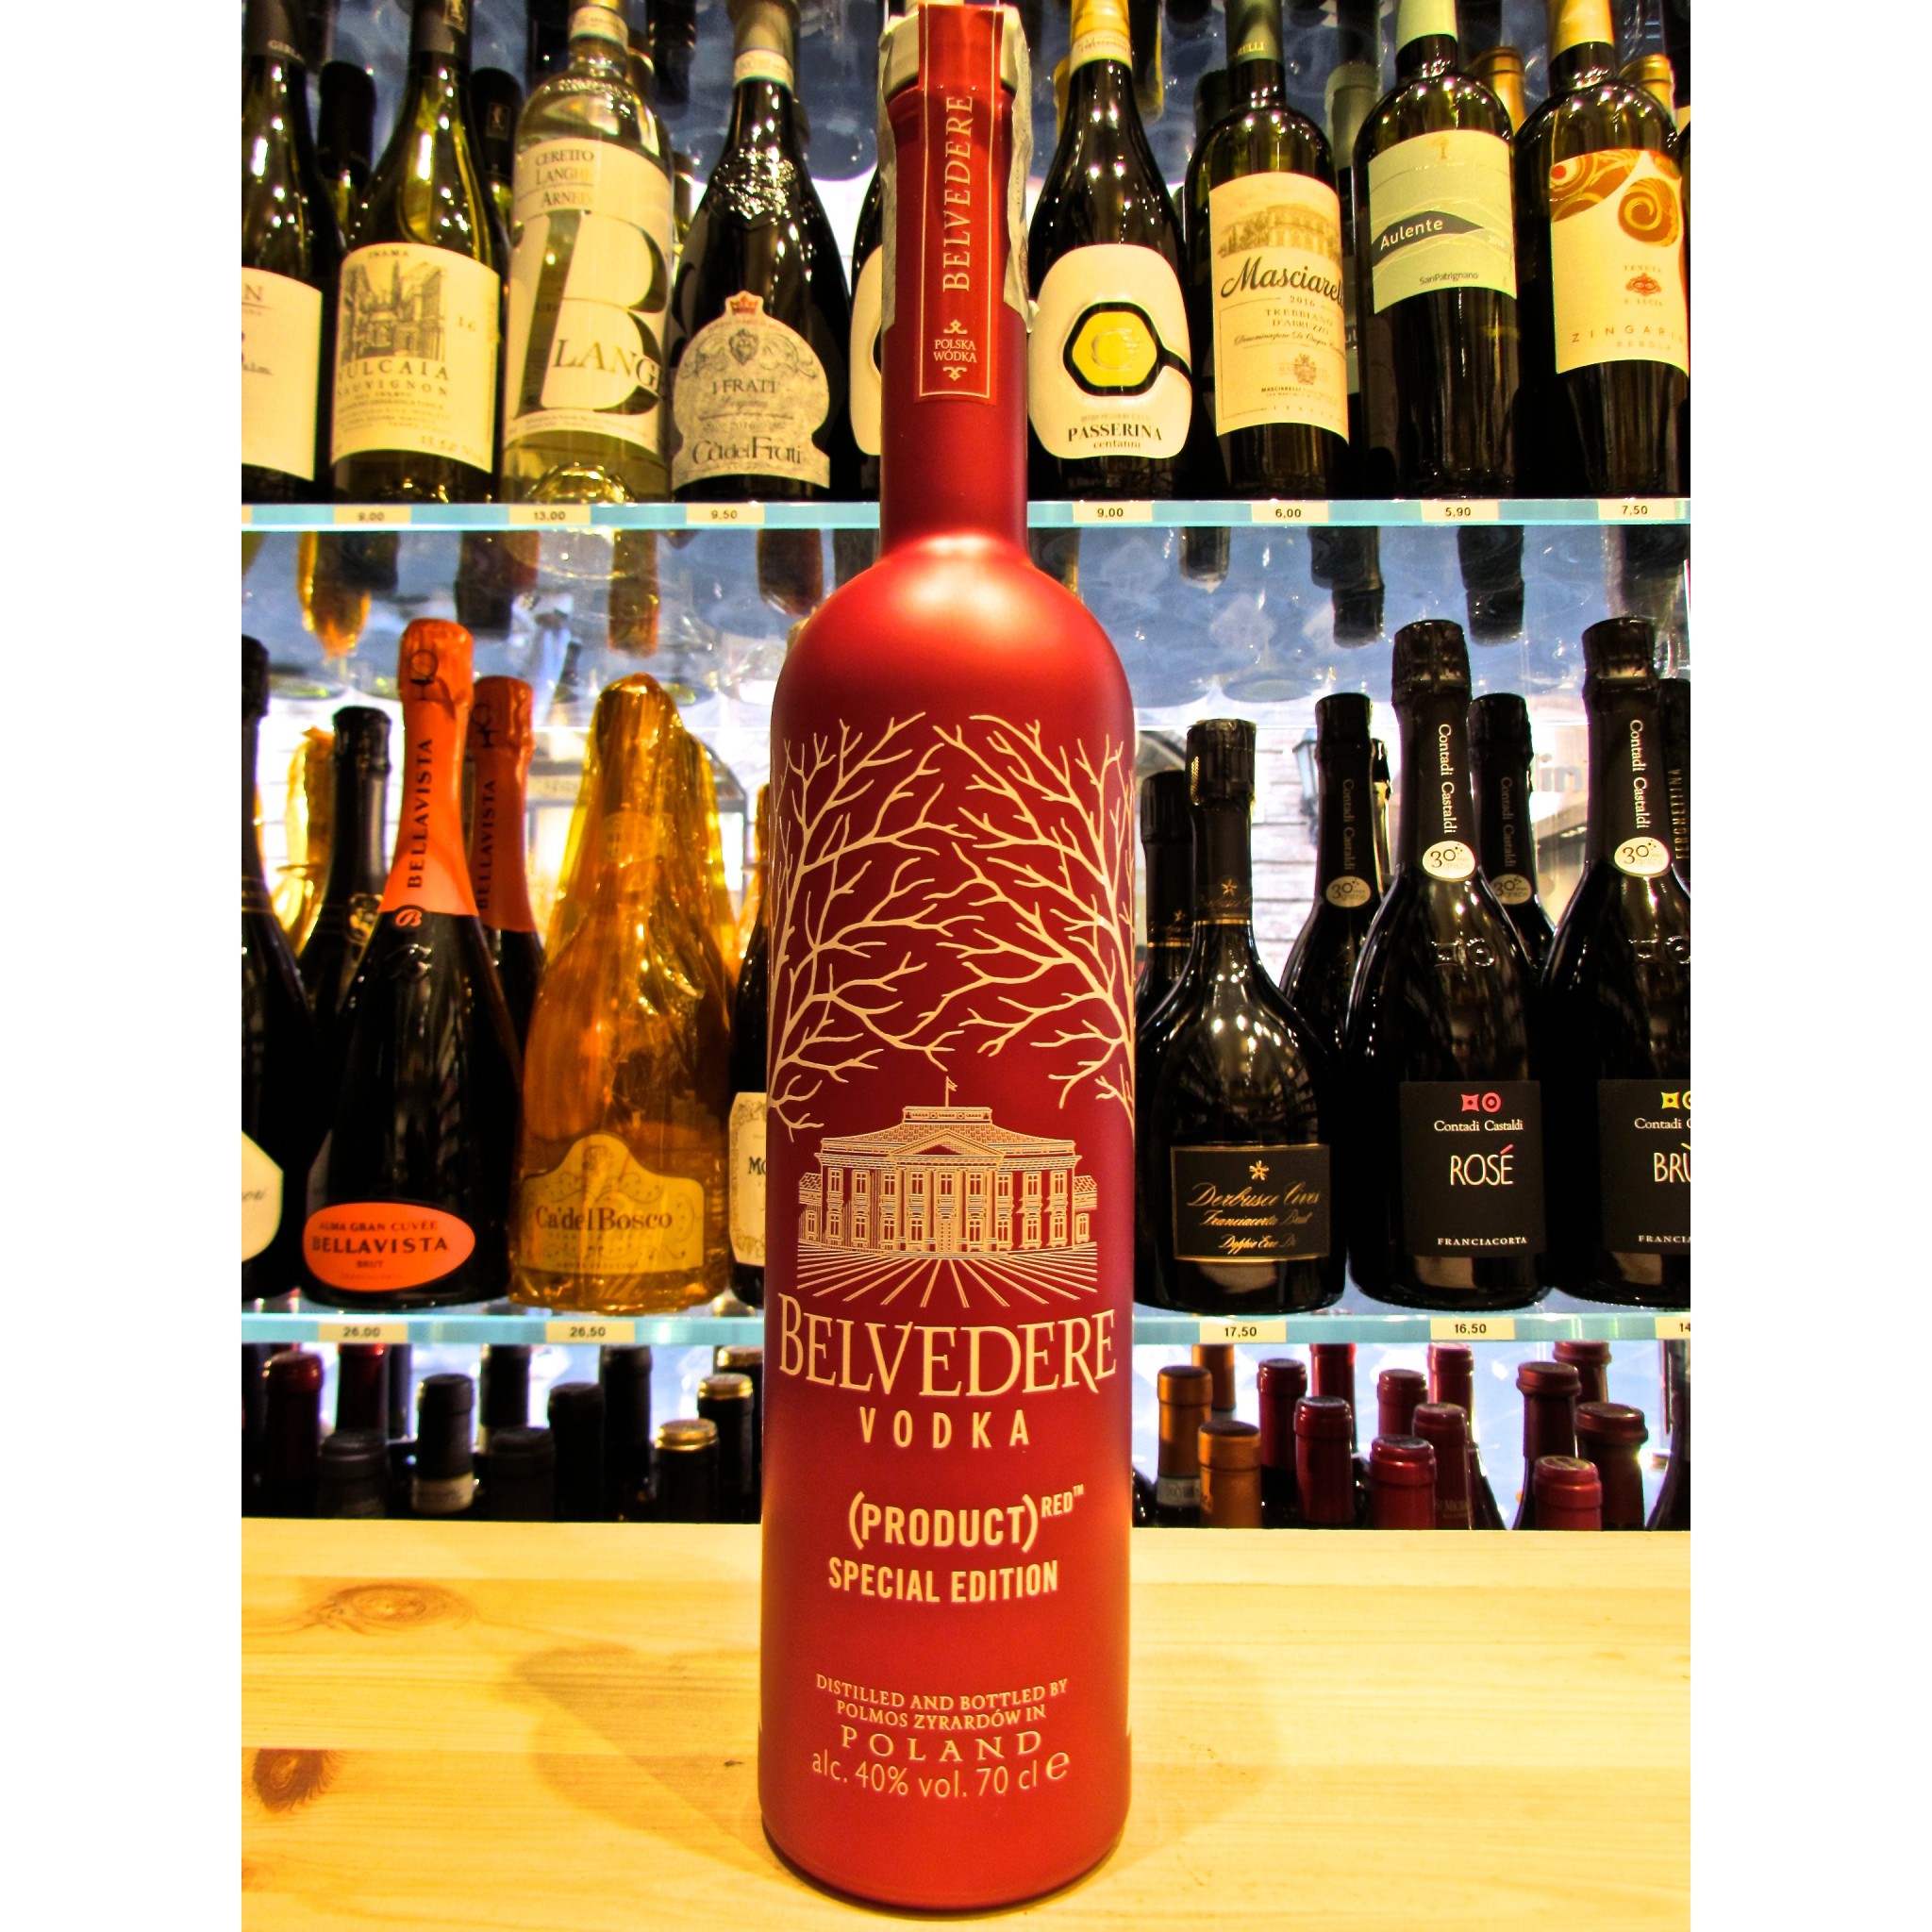 Belvedere Red Laolu Limited Edition Vodka 750ml - Old Town Tequila